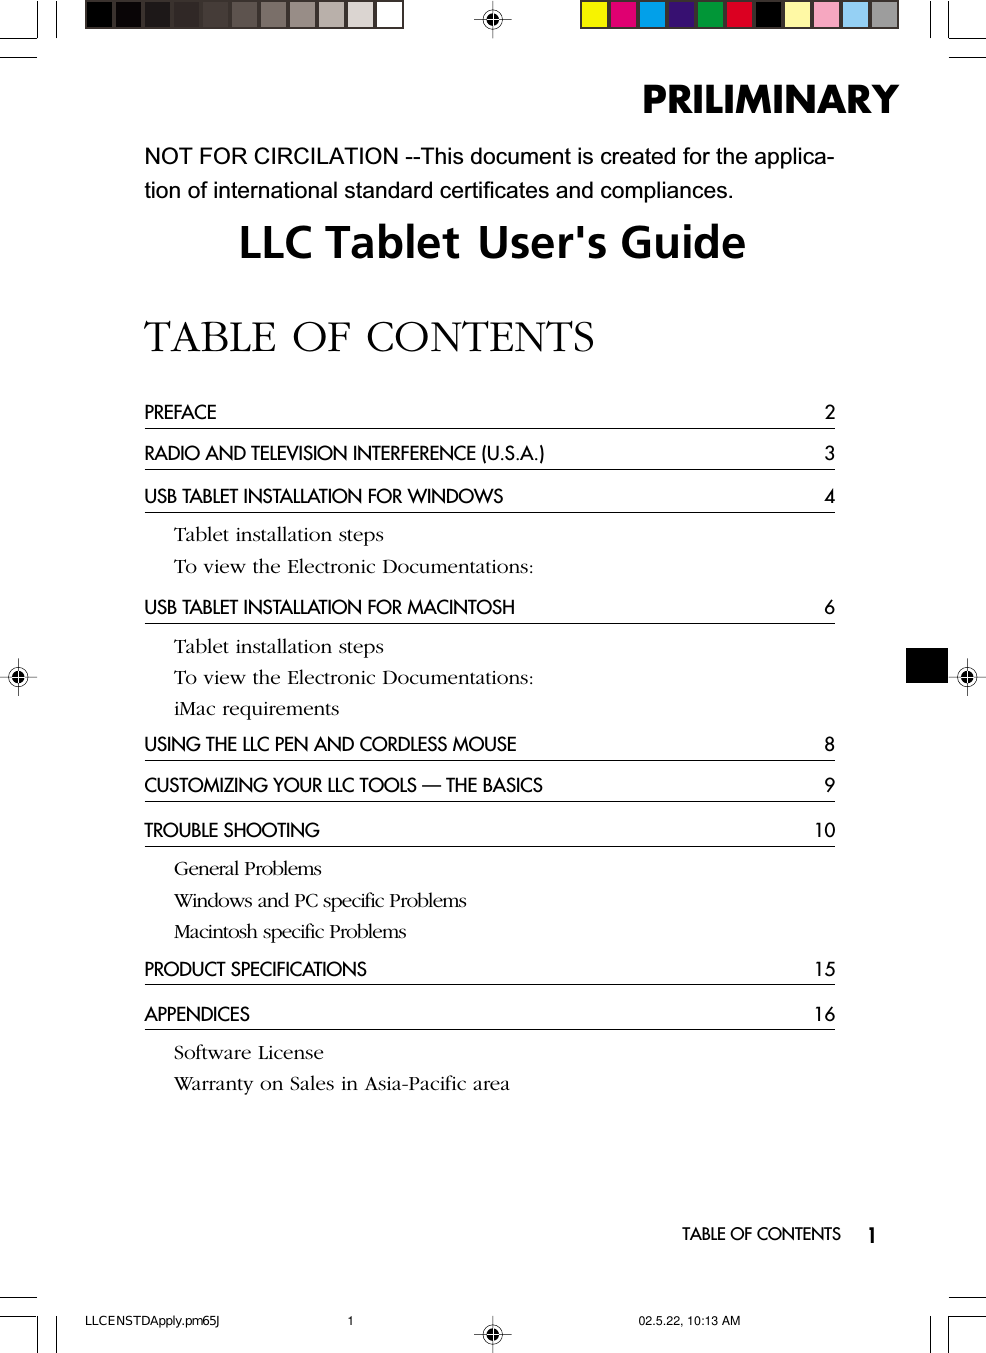 1LLC Tablet User&apos;s GuideTABLE OF CONTENTSPREFACE 2RADIO AND TELEVISION INTERFERENCE (U.S.A.) 3USB TABLET INSTALLATION FOR WINDOWS 4Tablet installation stepsTo view the Electronic Documentations:USB TABLET INSTALLATION FOR MACINTOSH 6Tablet installation stepsTo view the Electronic Documentations:iMac requirementsUSING THE LLC PEN AND CORDLESS MOUSE 8CUSTOMIZING YOUR LLC TOOLS — THE BASICS 9TROUBLE SHOOTING 10General ProblemsWindows and PC specific ProblemsMacintosh specific ProblemsPRODUCT SPECIFICATIONS 15APPENDICES 16Software LicenseWarranty on Sales in Asia-Pacific areaTABLE OF CONTENTSPRILIMINARYNOT FOR CIRCILATION --This document is created for the applica-tion of international standard certificates and compliances.LLCENSTDApply.pm65J 02.5.22, 10:13 AM1